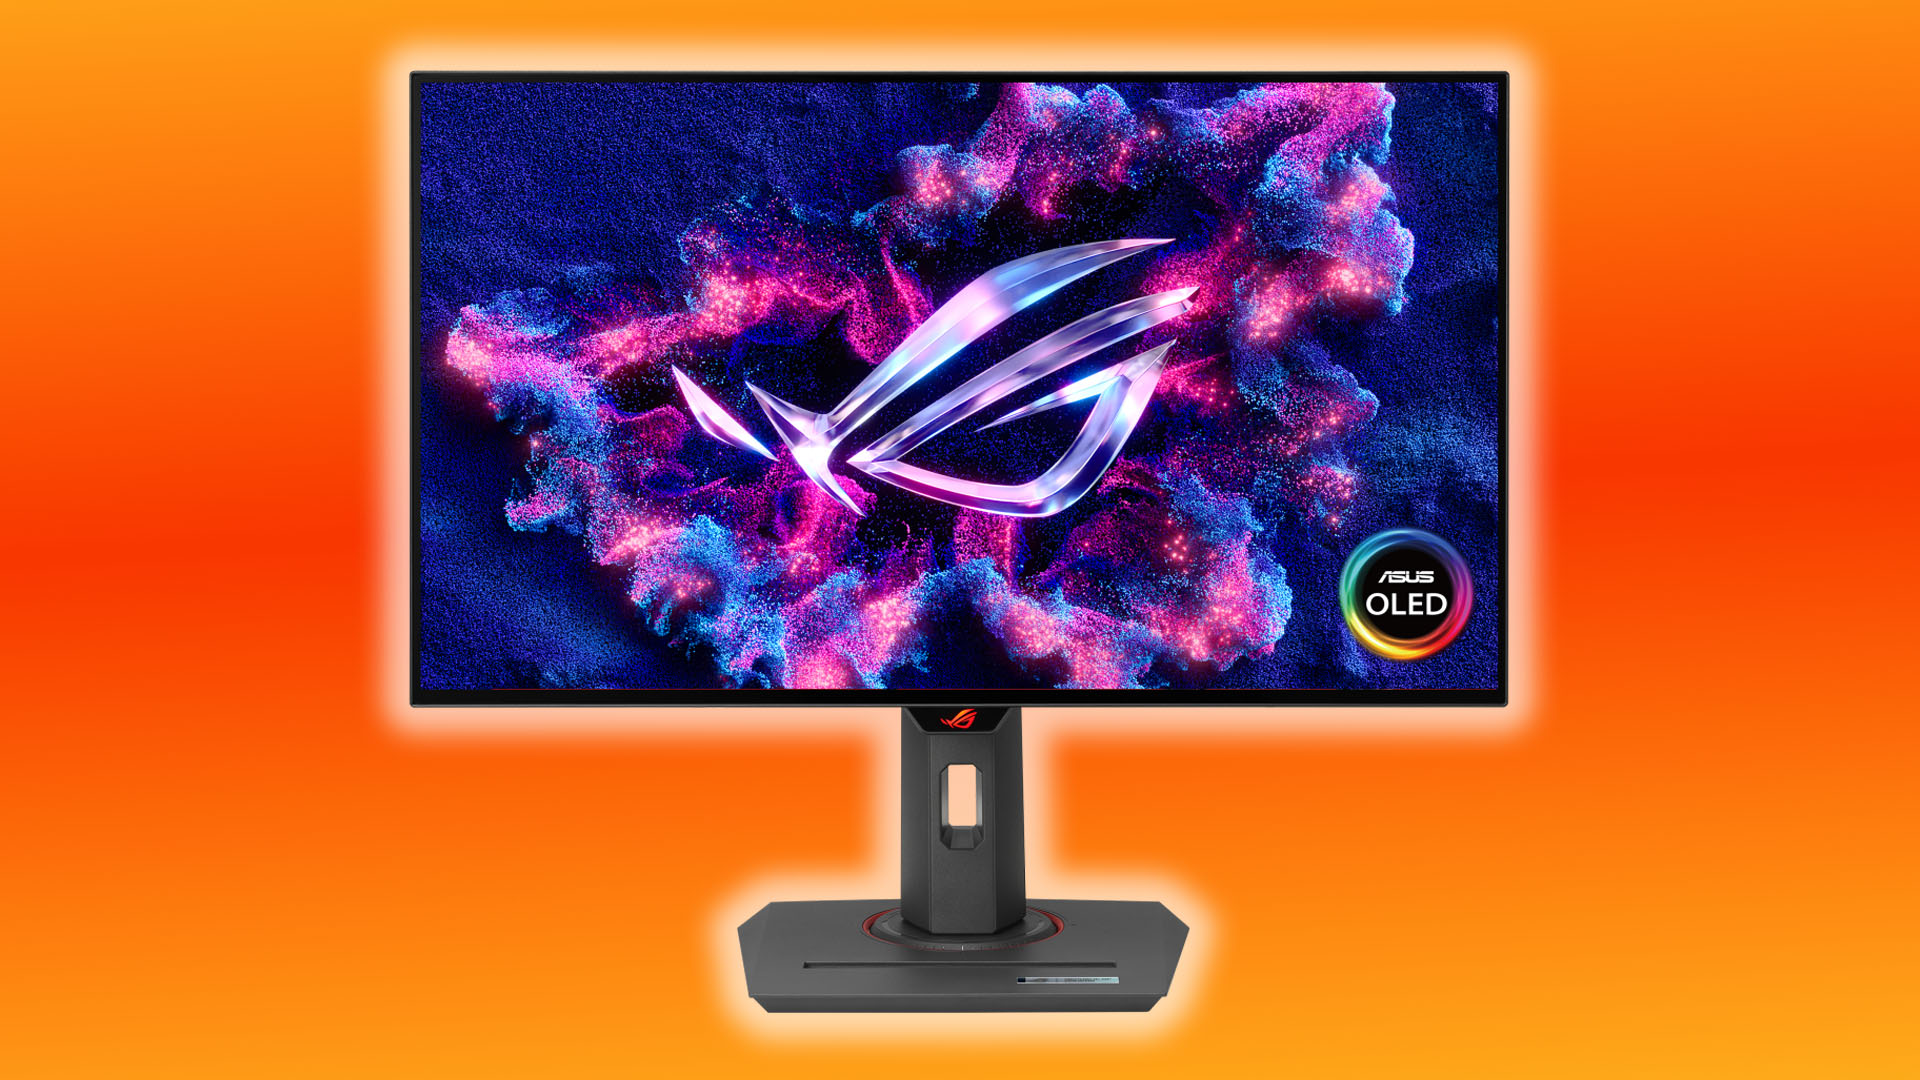 The latest OLED gaming monitor from Asus features groundbreaking technology that is a world first.